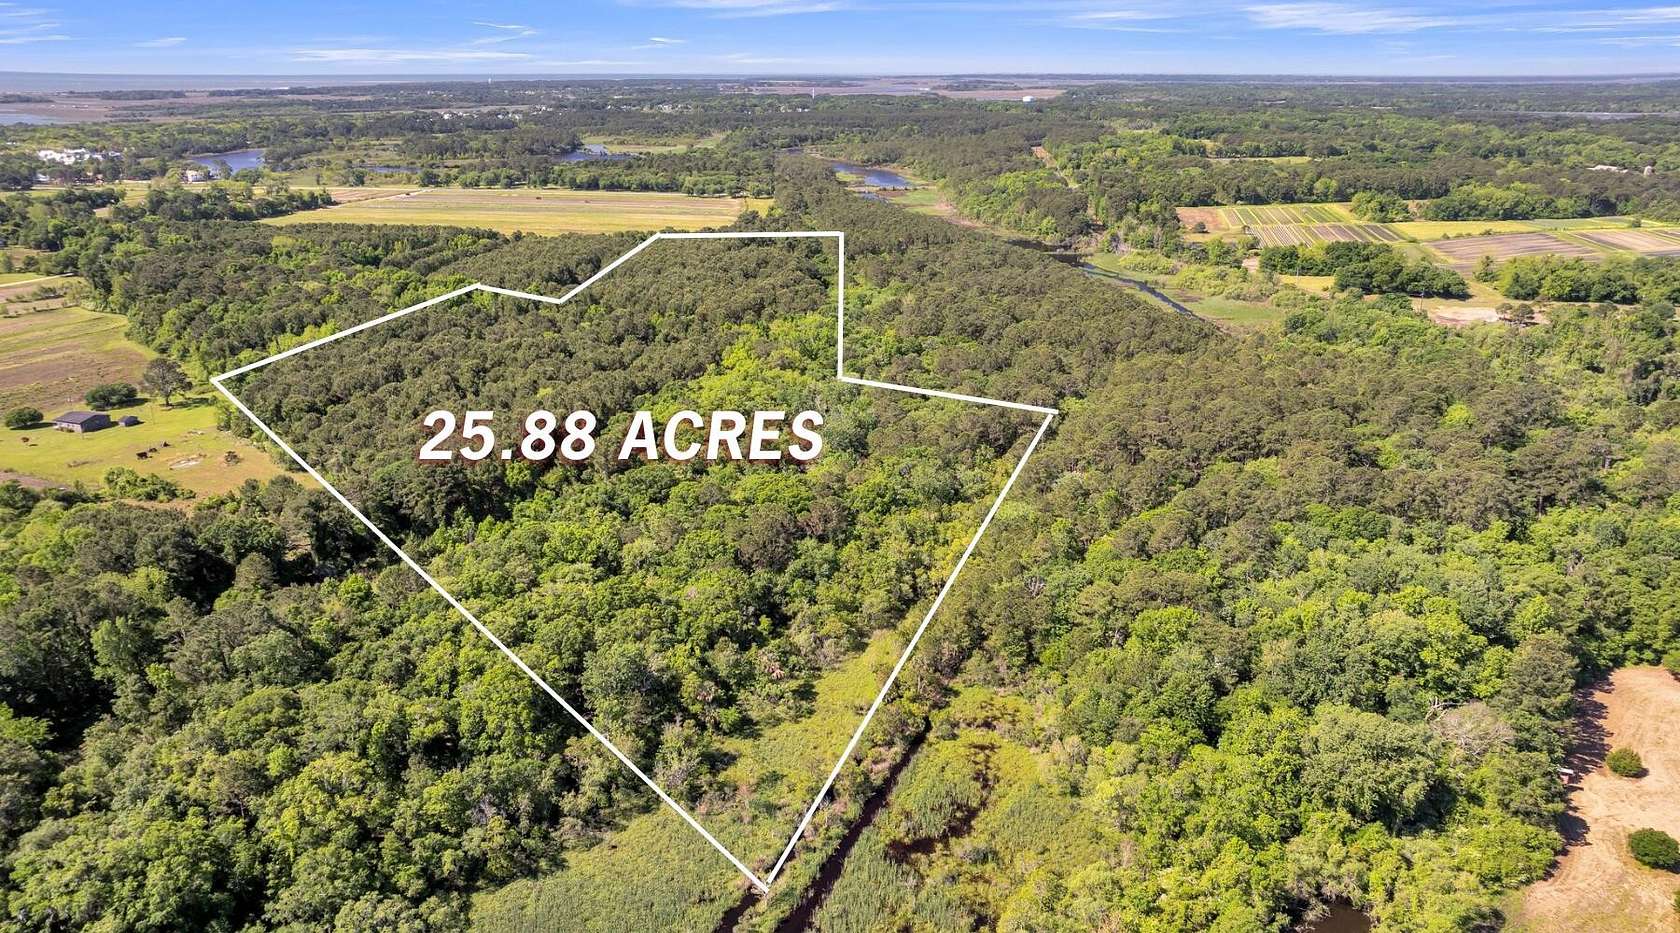 25.88 Acres of Agricultural Land for Sale in Johns Island, South Carolina